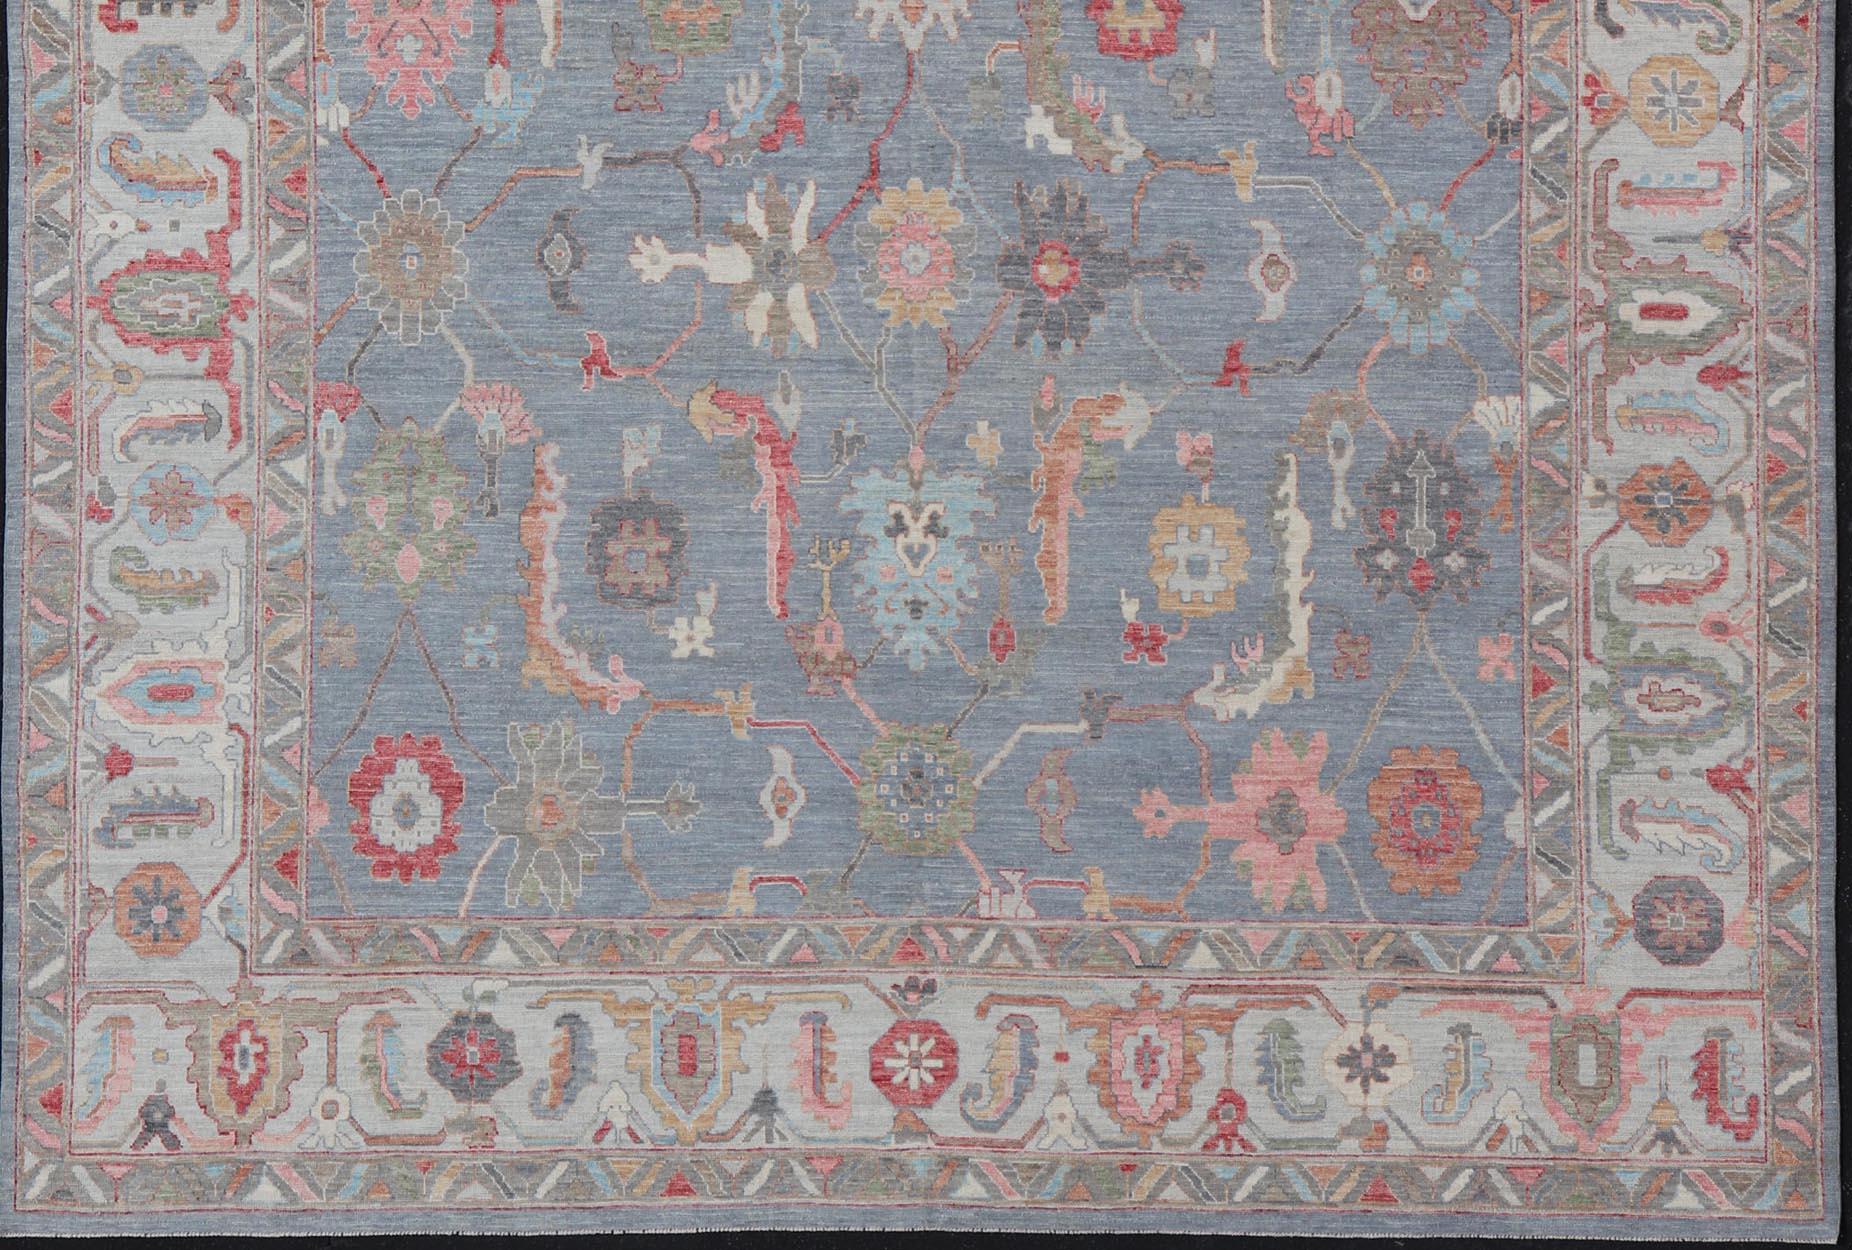 This piece has very rich colors, from the enhanced dark gray-blue background, to the saturated pinks, green, blues, oranges and taupe used in the design, The slightly-arabesque floral pattern also has hints of tribal designs within the field as well